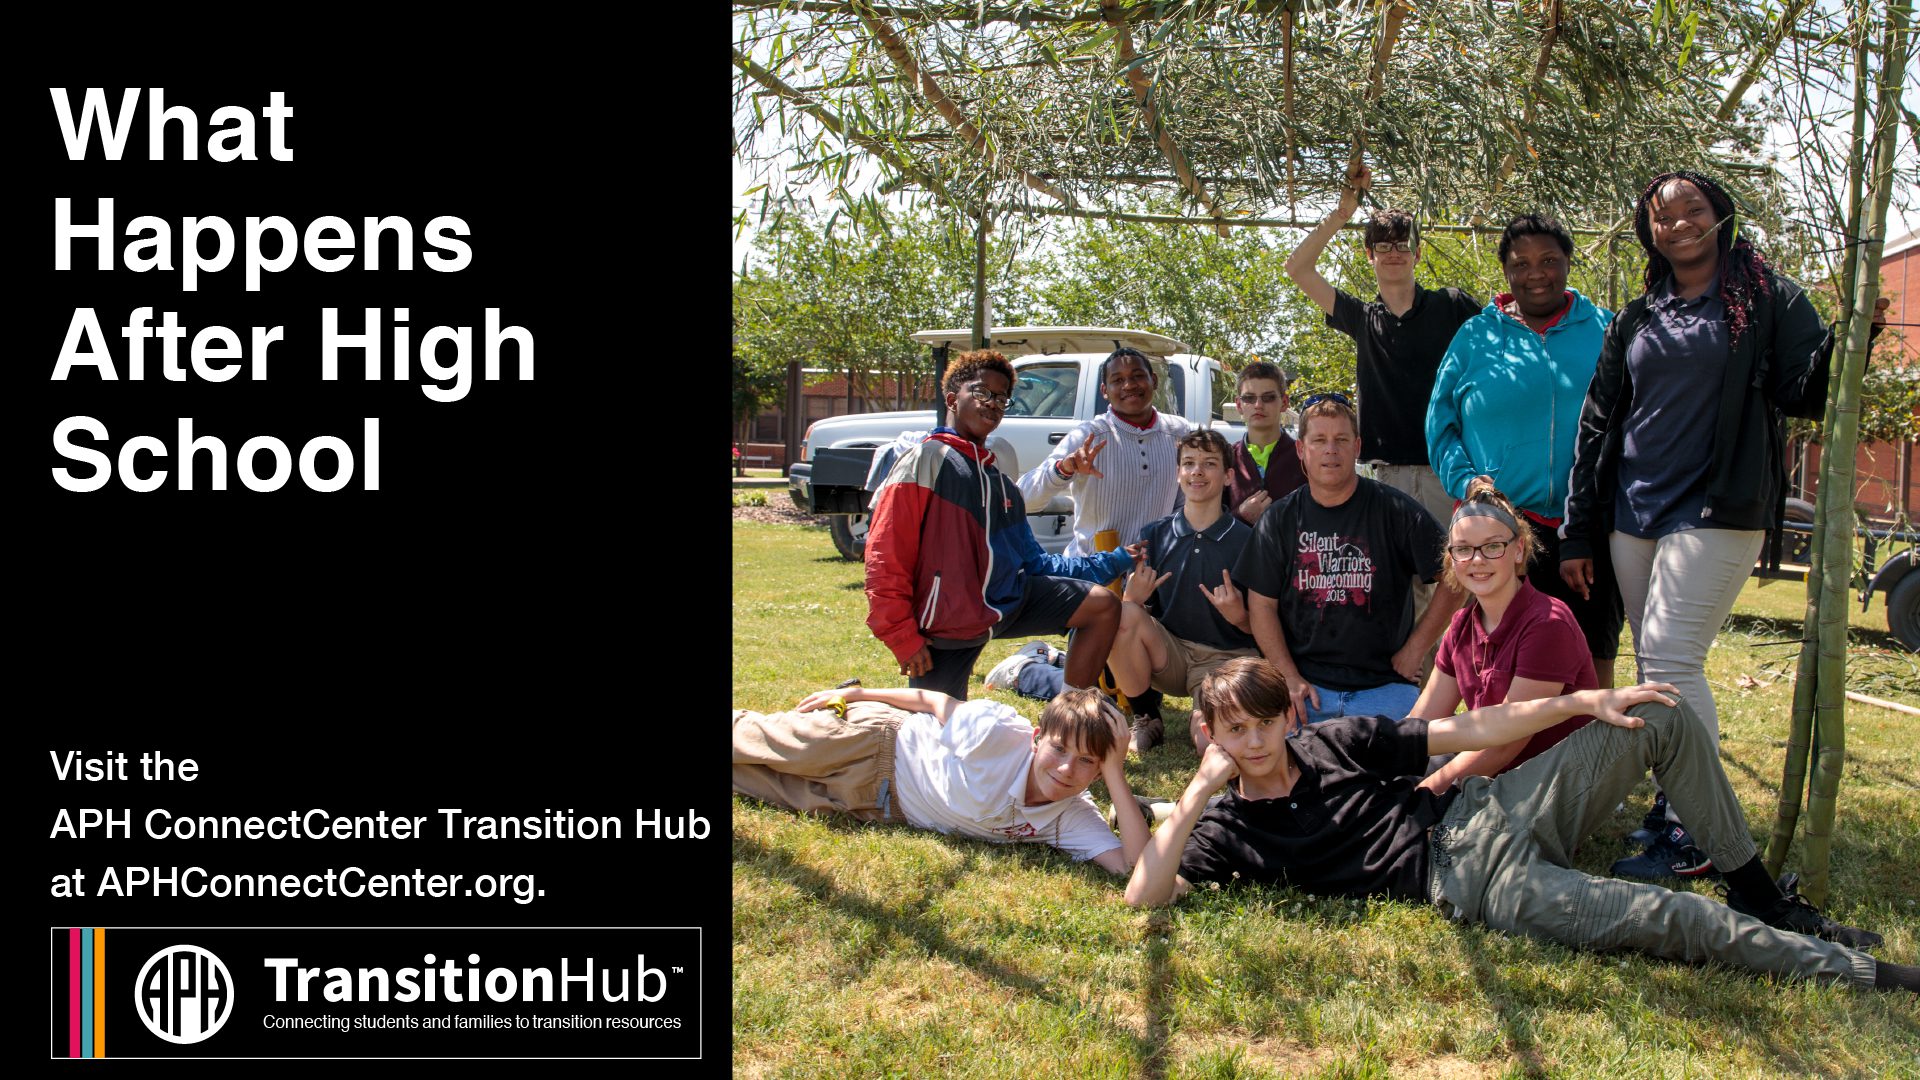 text "what happens after high school. Visit the APH ConnectCenter Transition Hub at aphconnectcenter.org/" Transition Hub logo. image of a group of teenage students smiling together outside